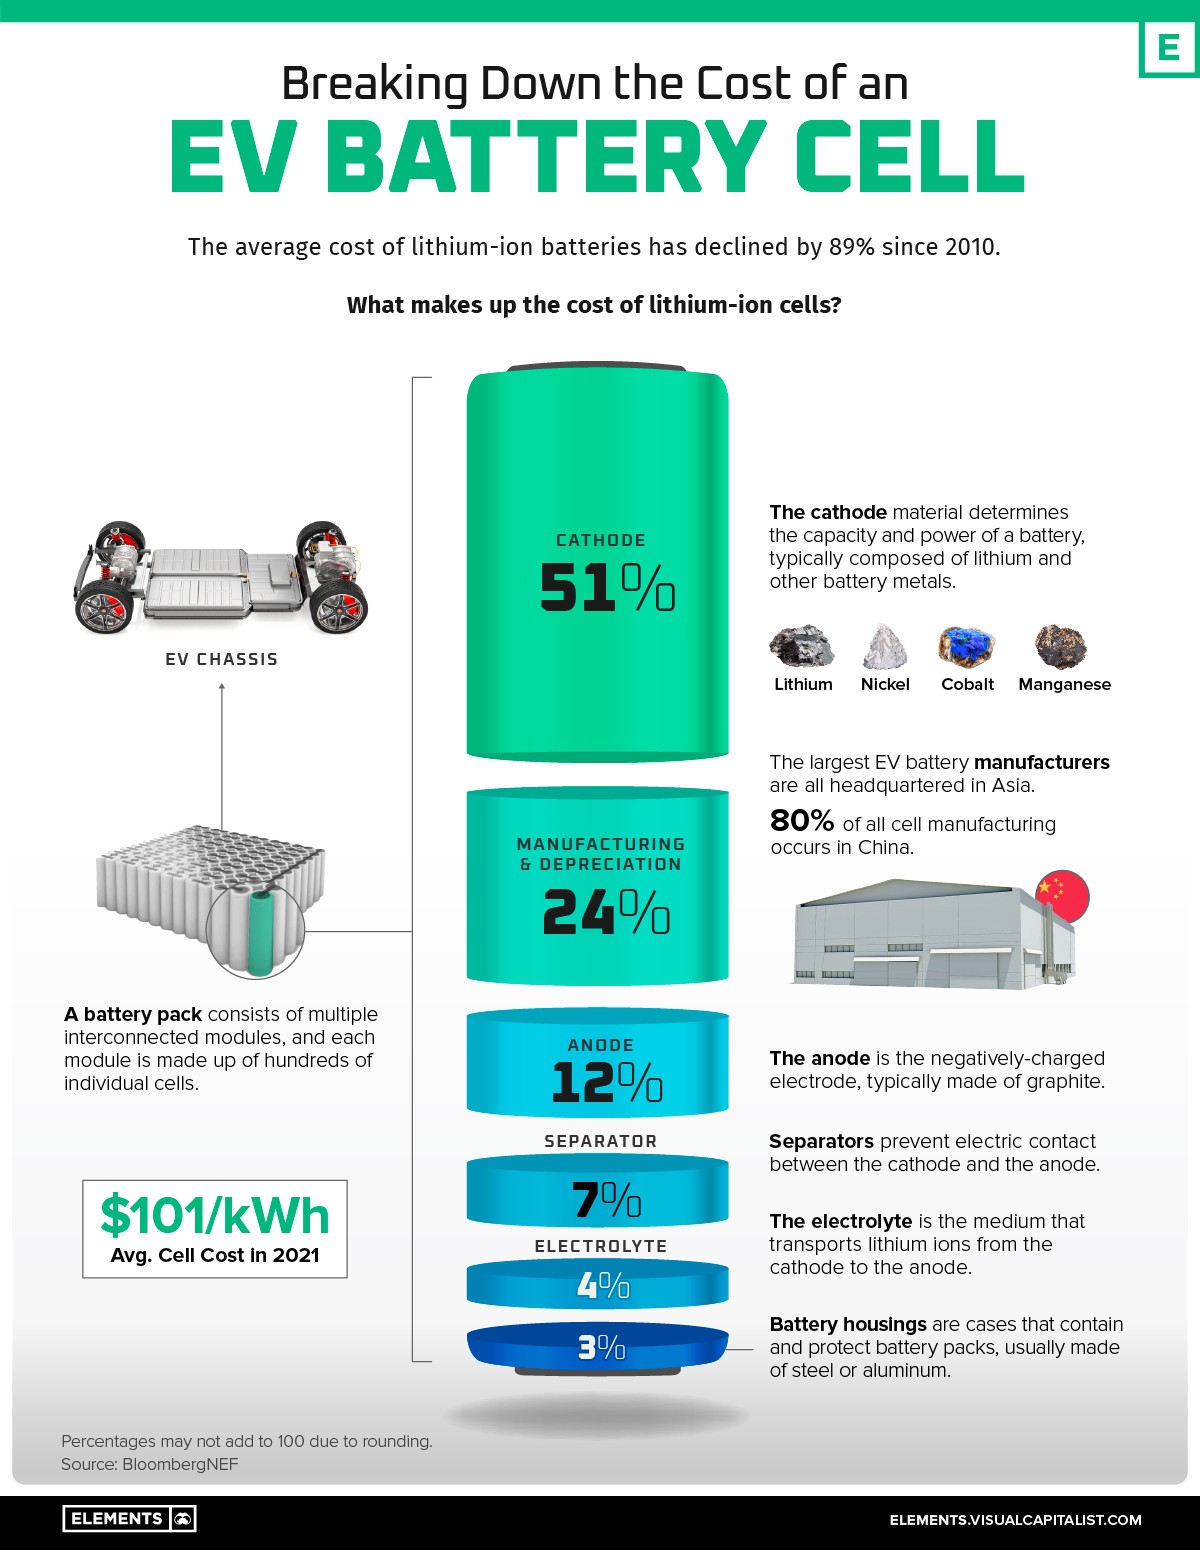 Here's a breakdown of the cost of an EV battery